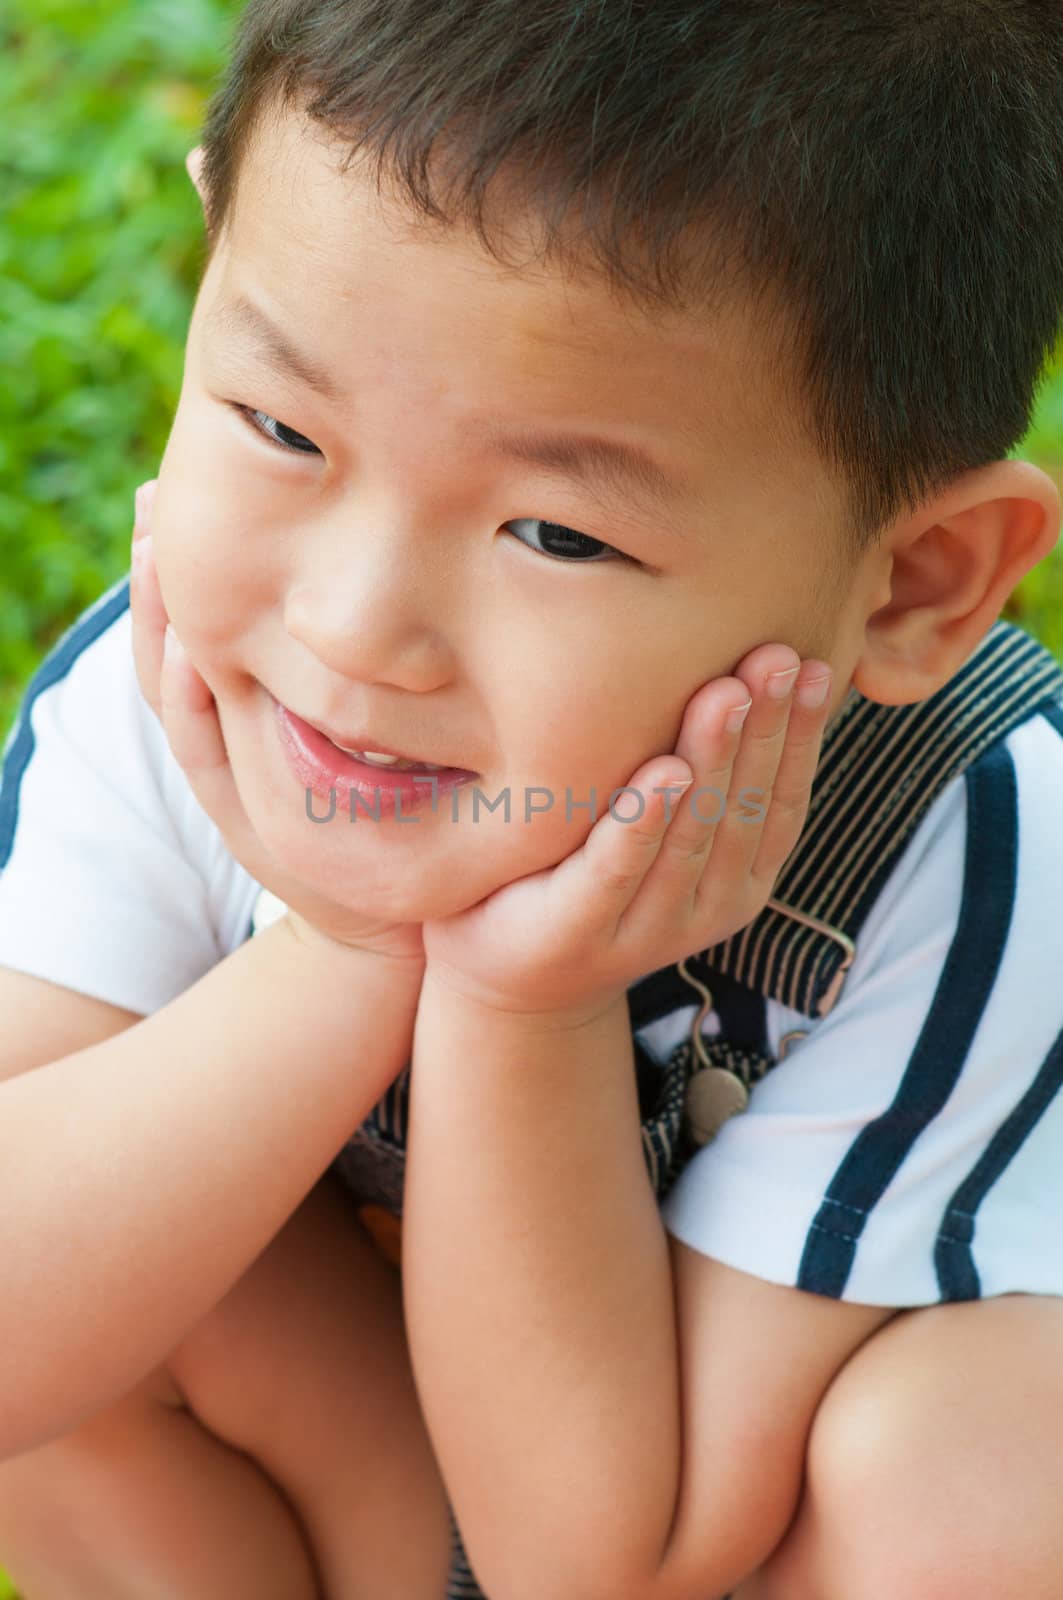 Close-up shot of a young Asian boy with smile on his face.